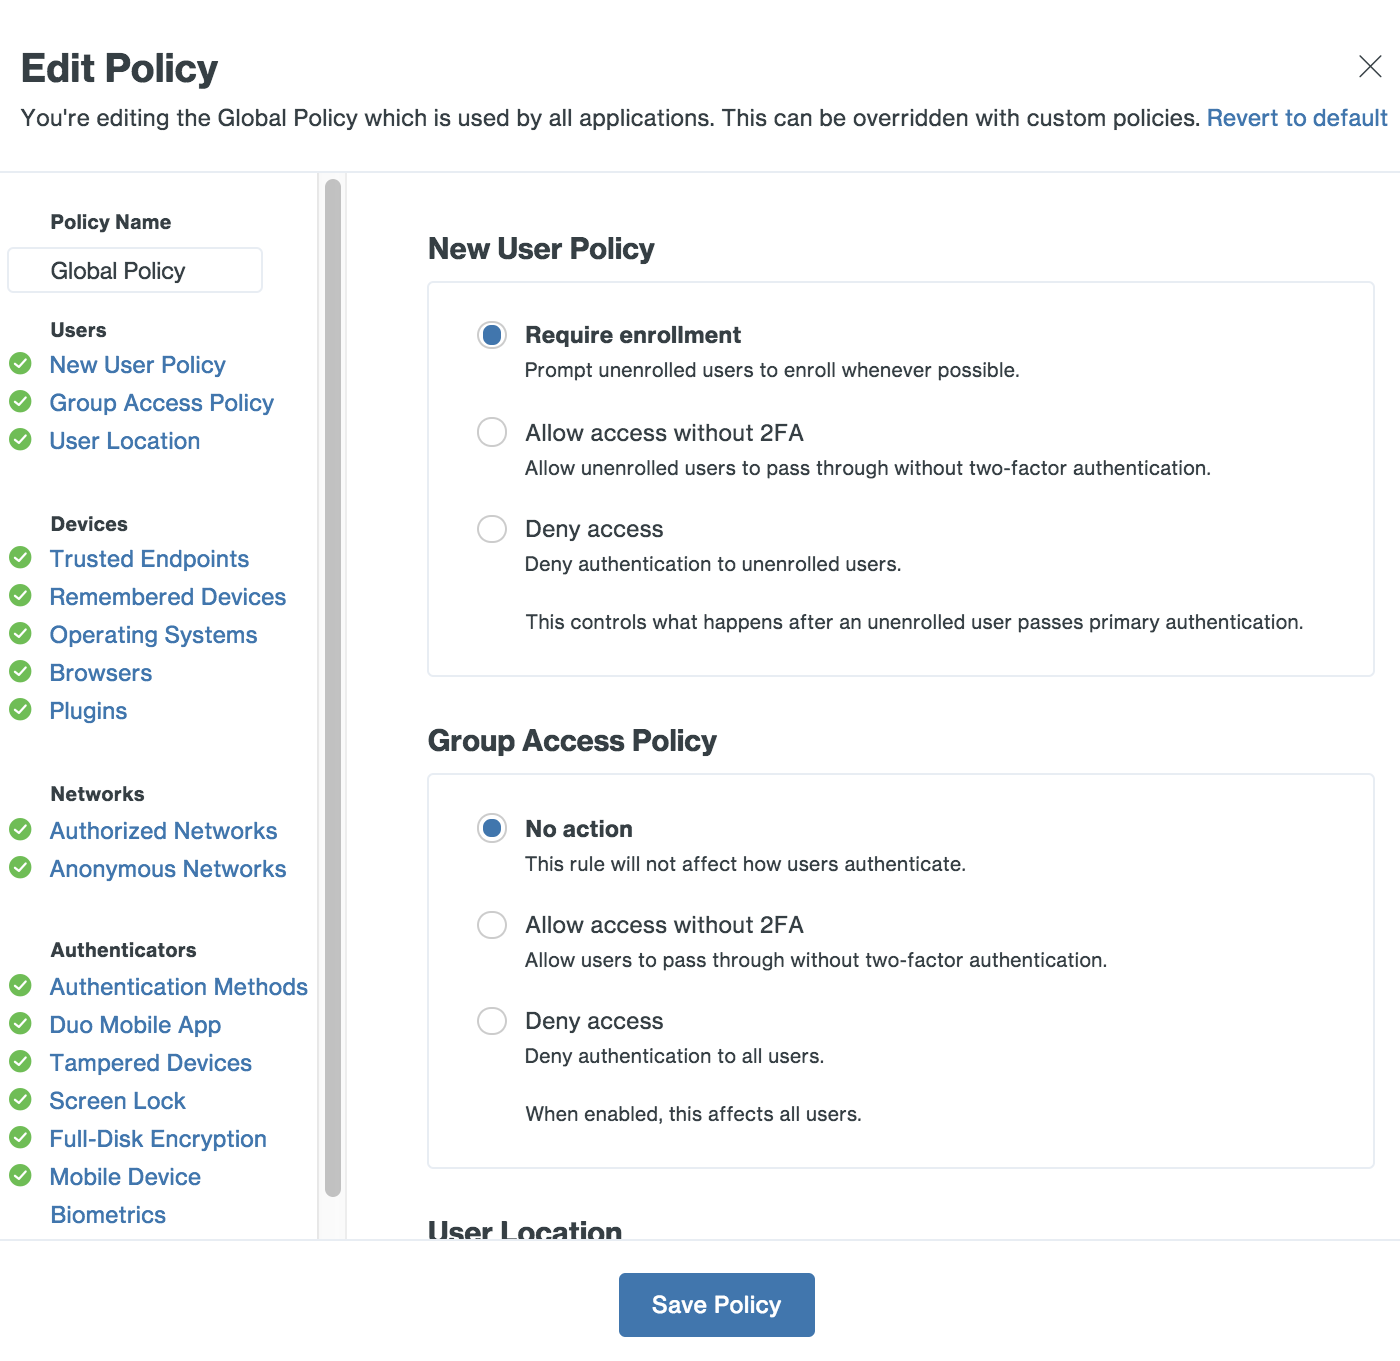 A screenshot of the Global Policy Editor. The headers on this section are New User Policy and Group Access Policy.